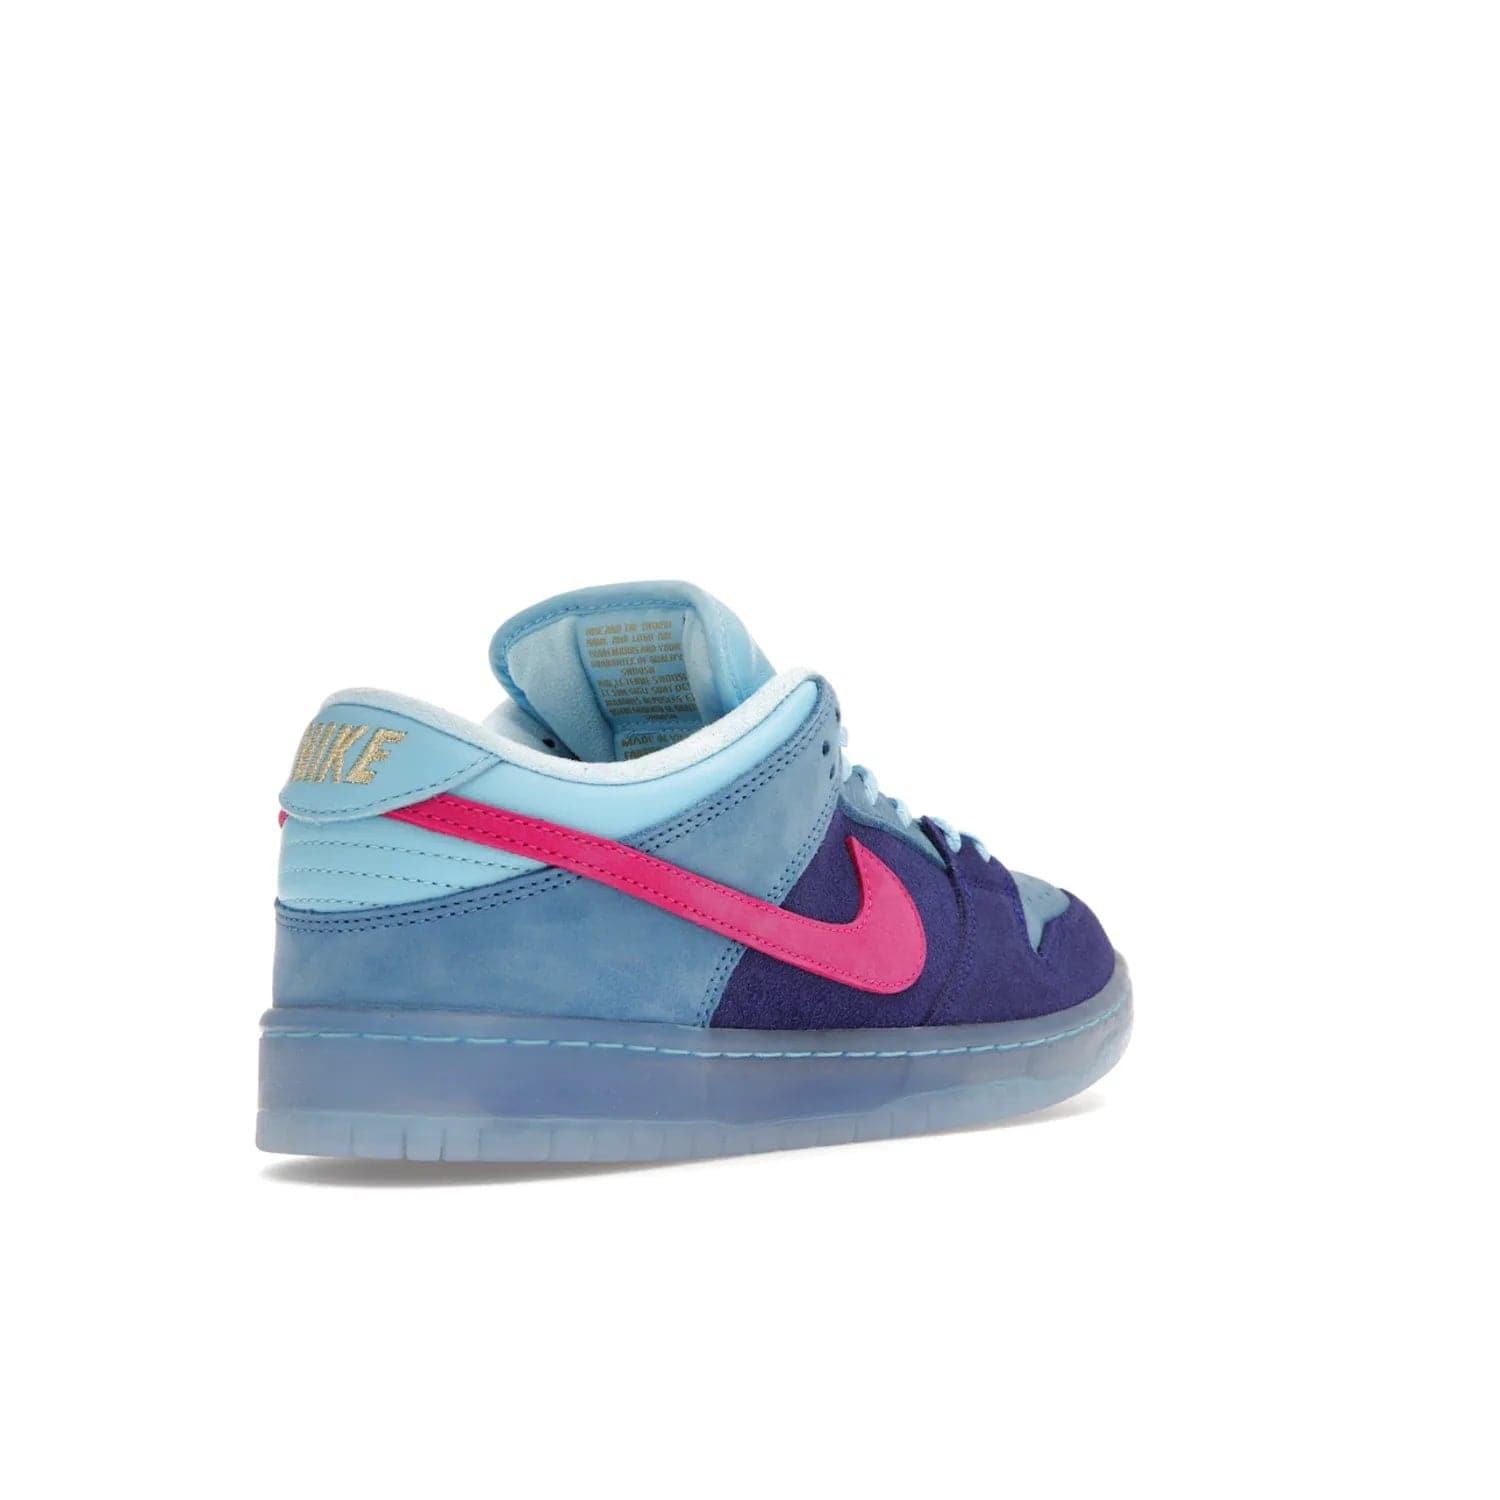 Nike SB Dunk Low Run The Jewels - Image 32 - Only at www.BallersClubKickz.com - The Nike SB Dunk Low Run The Jewels pays tribute to the Run the Jewels 3 album cover. It features a blue suede upper with pink suede accents, gold branding and 3 lace sets. RTJ insoles complete this limited edition sneaker. Get it now for your shoe collection.